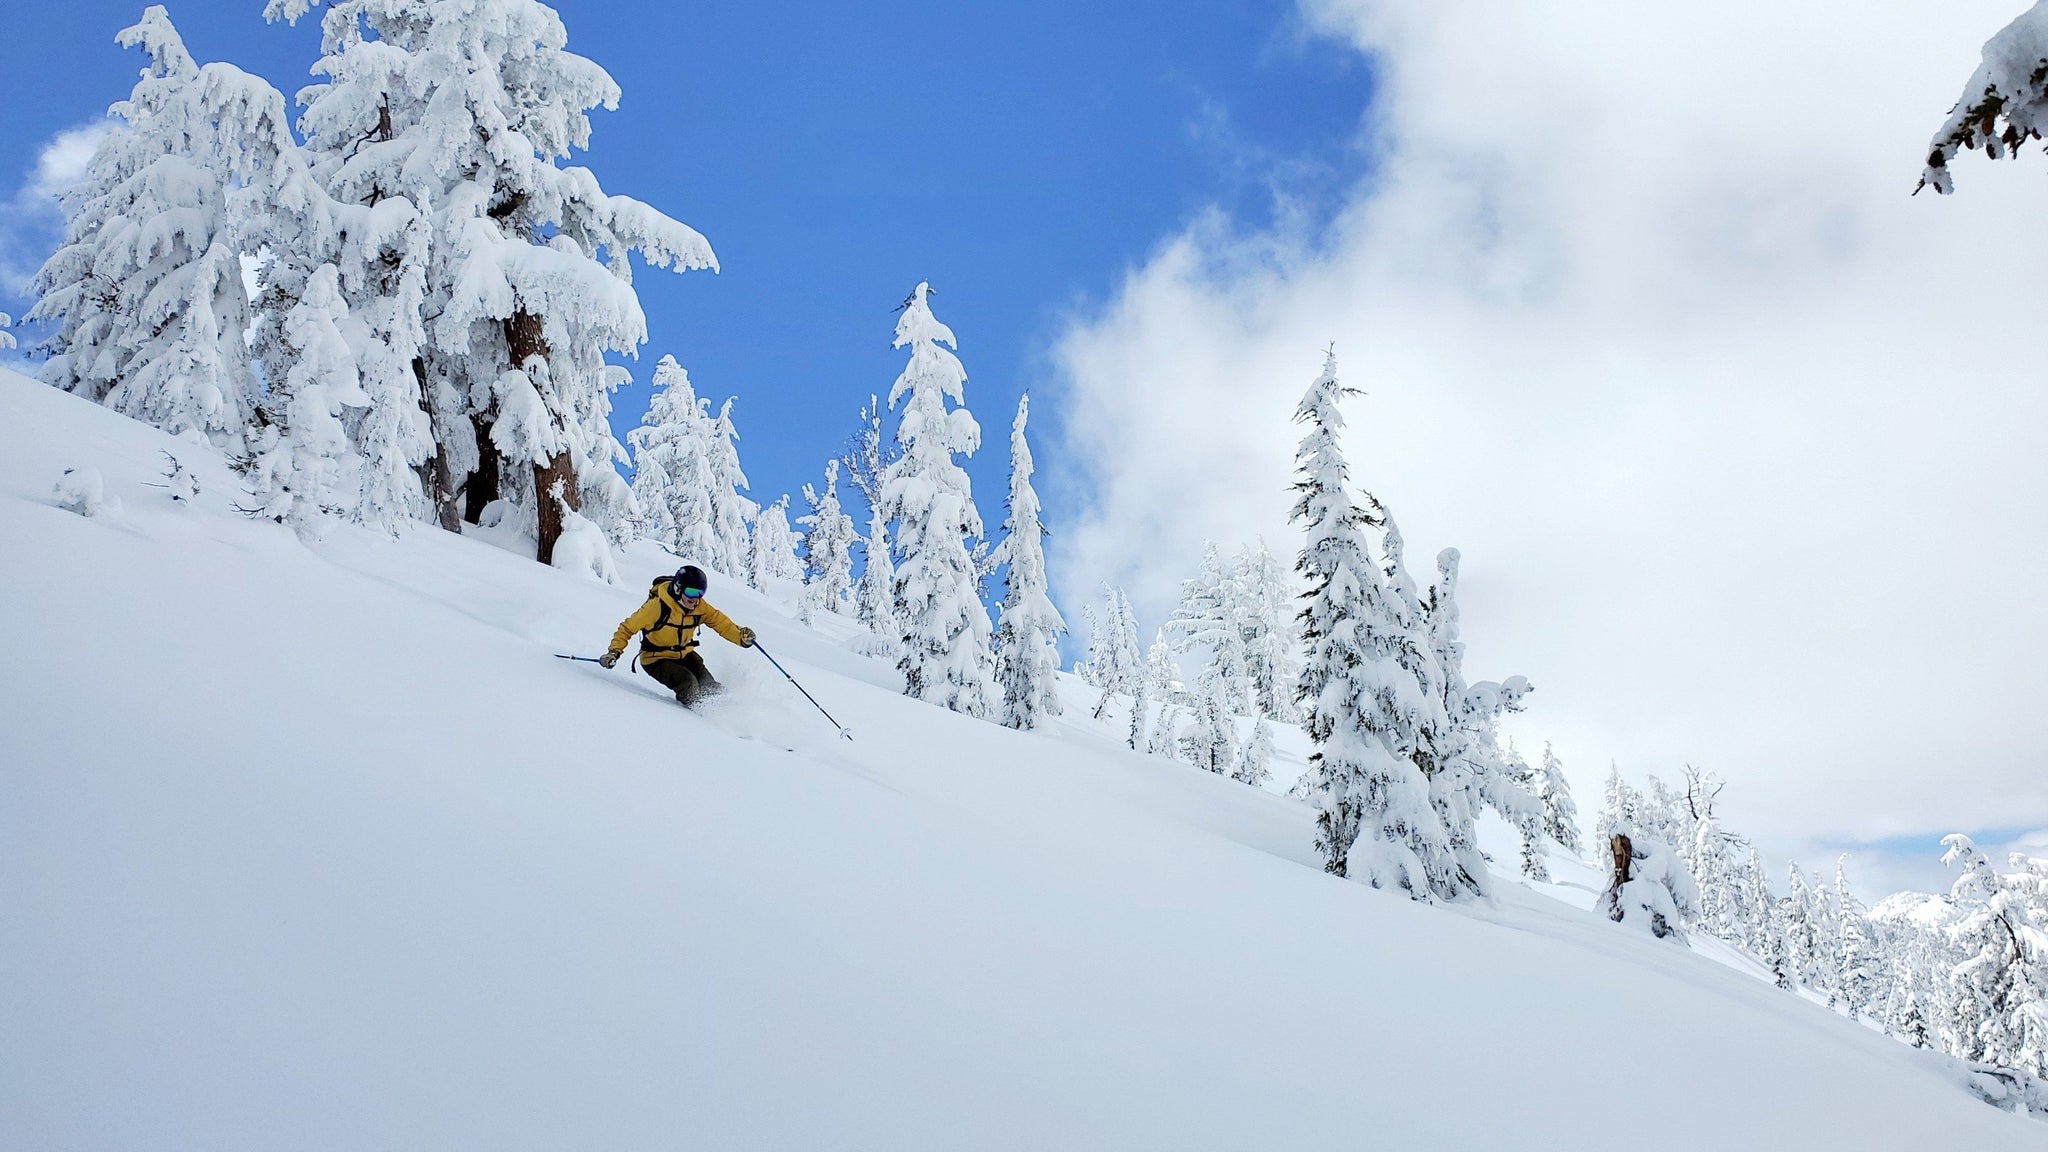 A skier ripping fresh powder in the Tahoe Backcountry